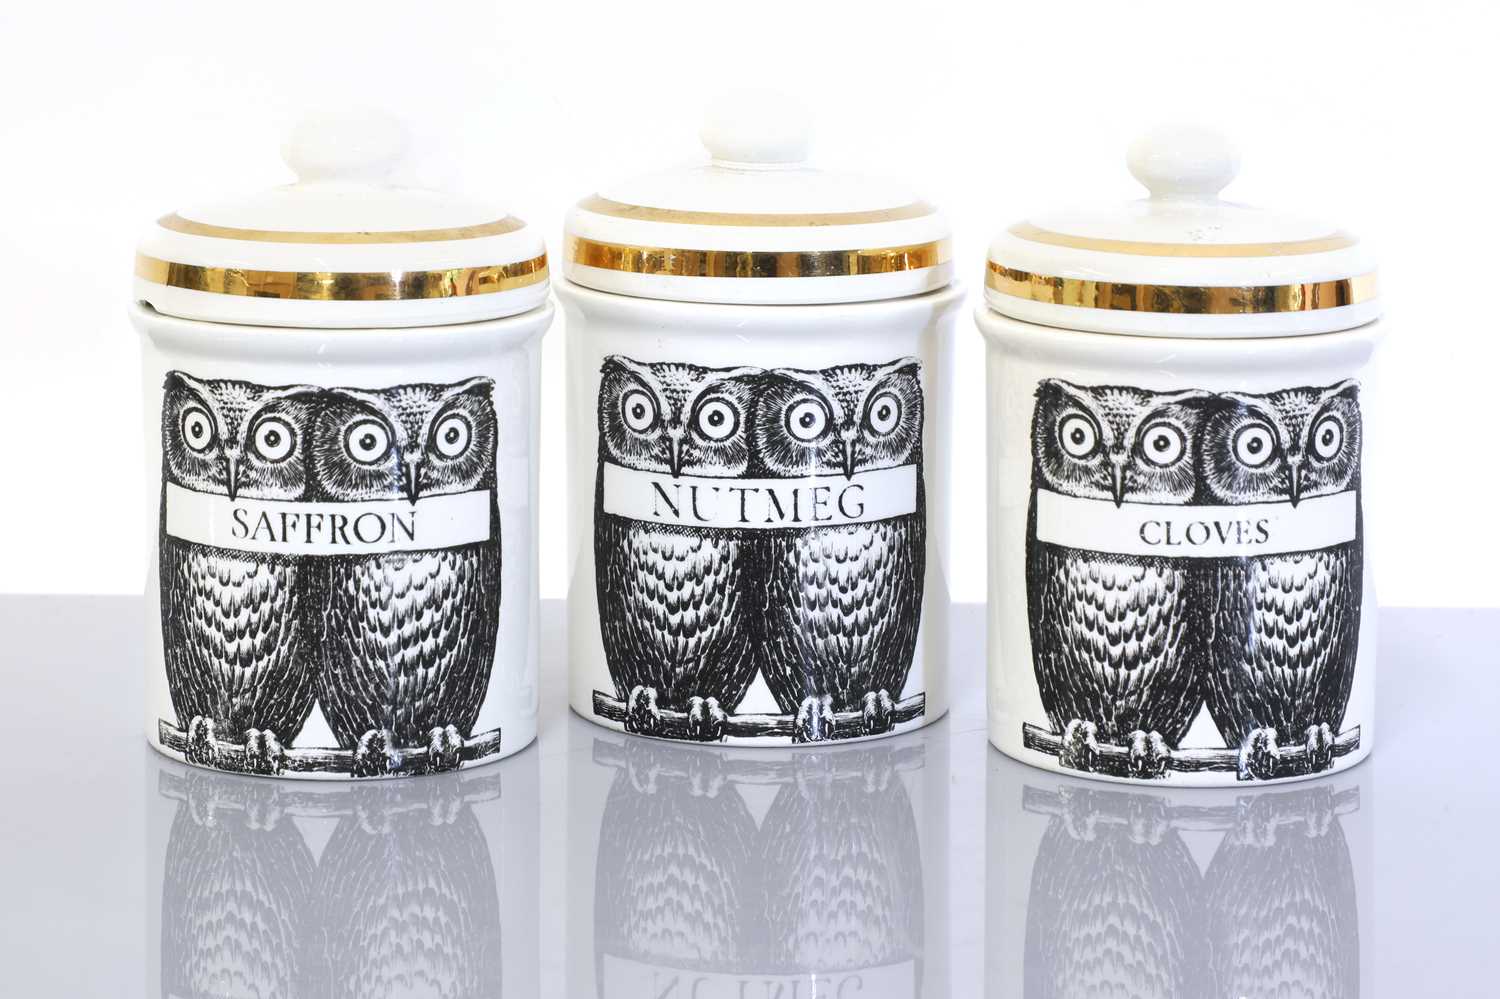 Lot 318 - An Italian Fornasetti group of three porcelain owl storage jars or canisters